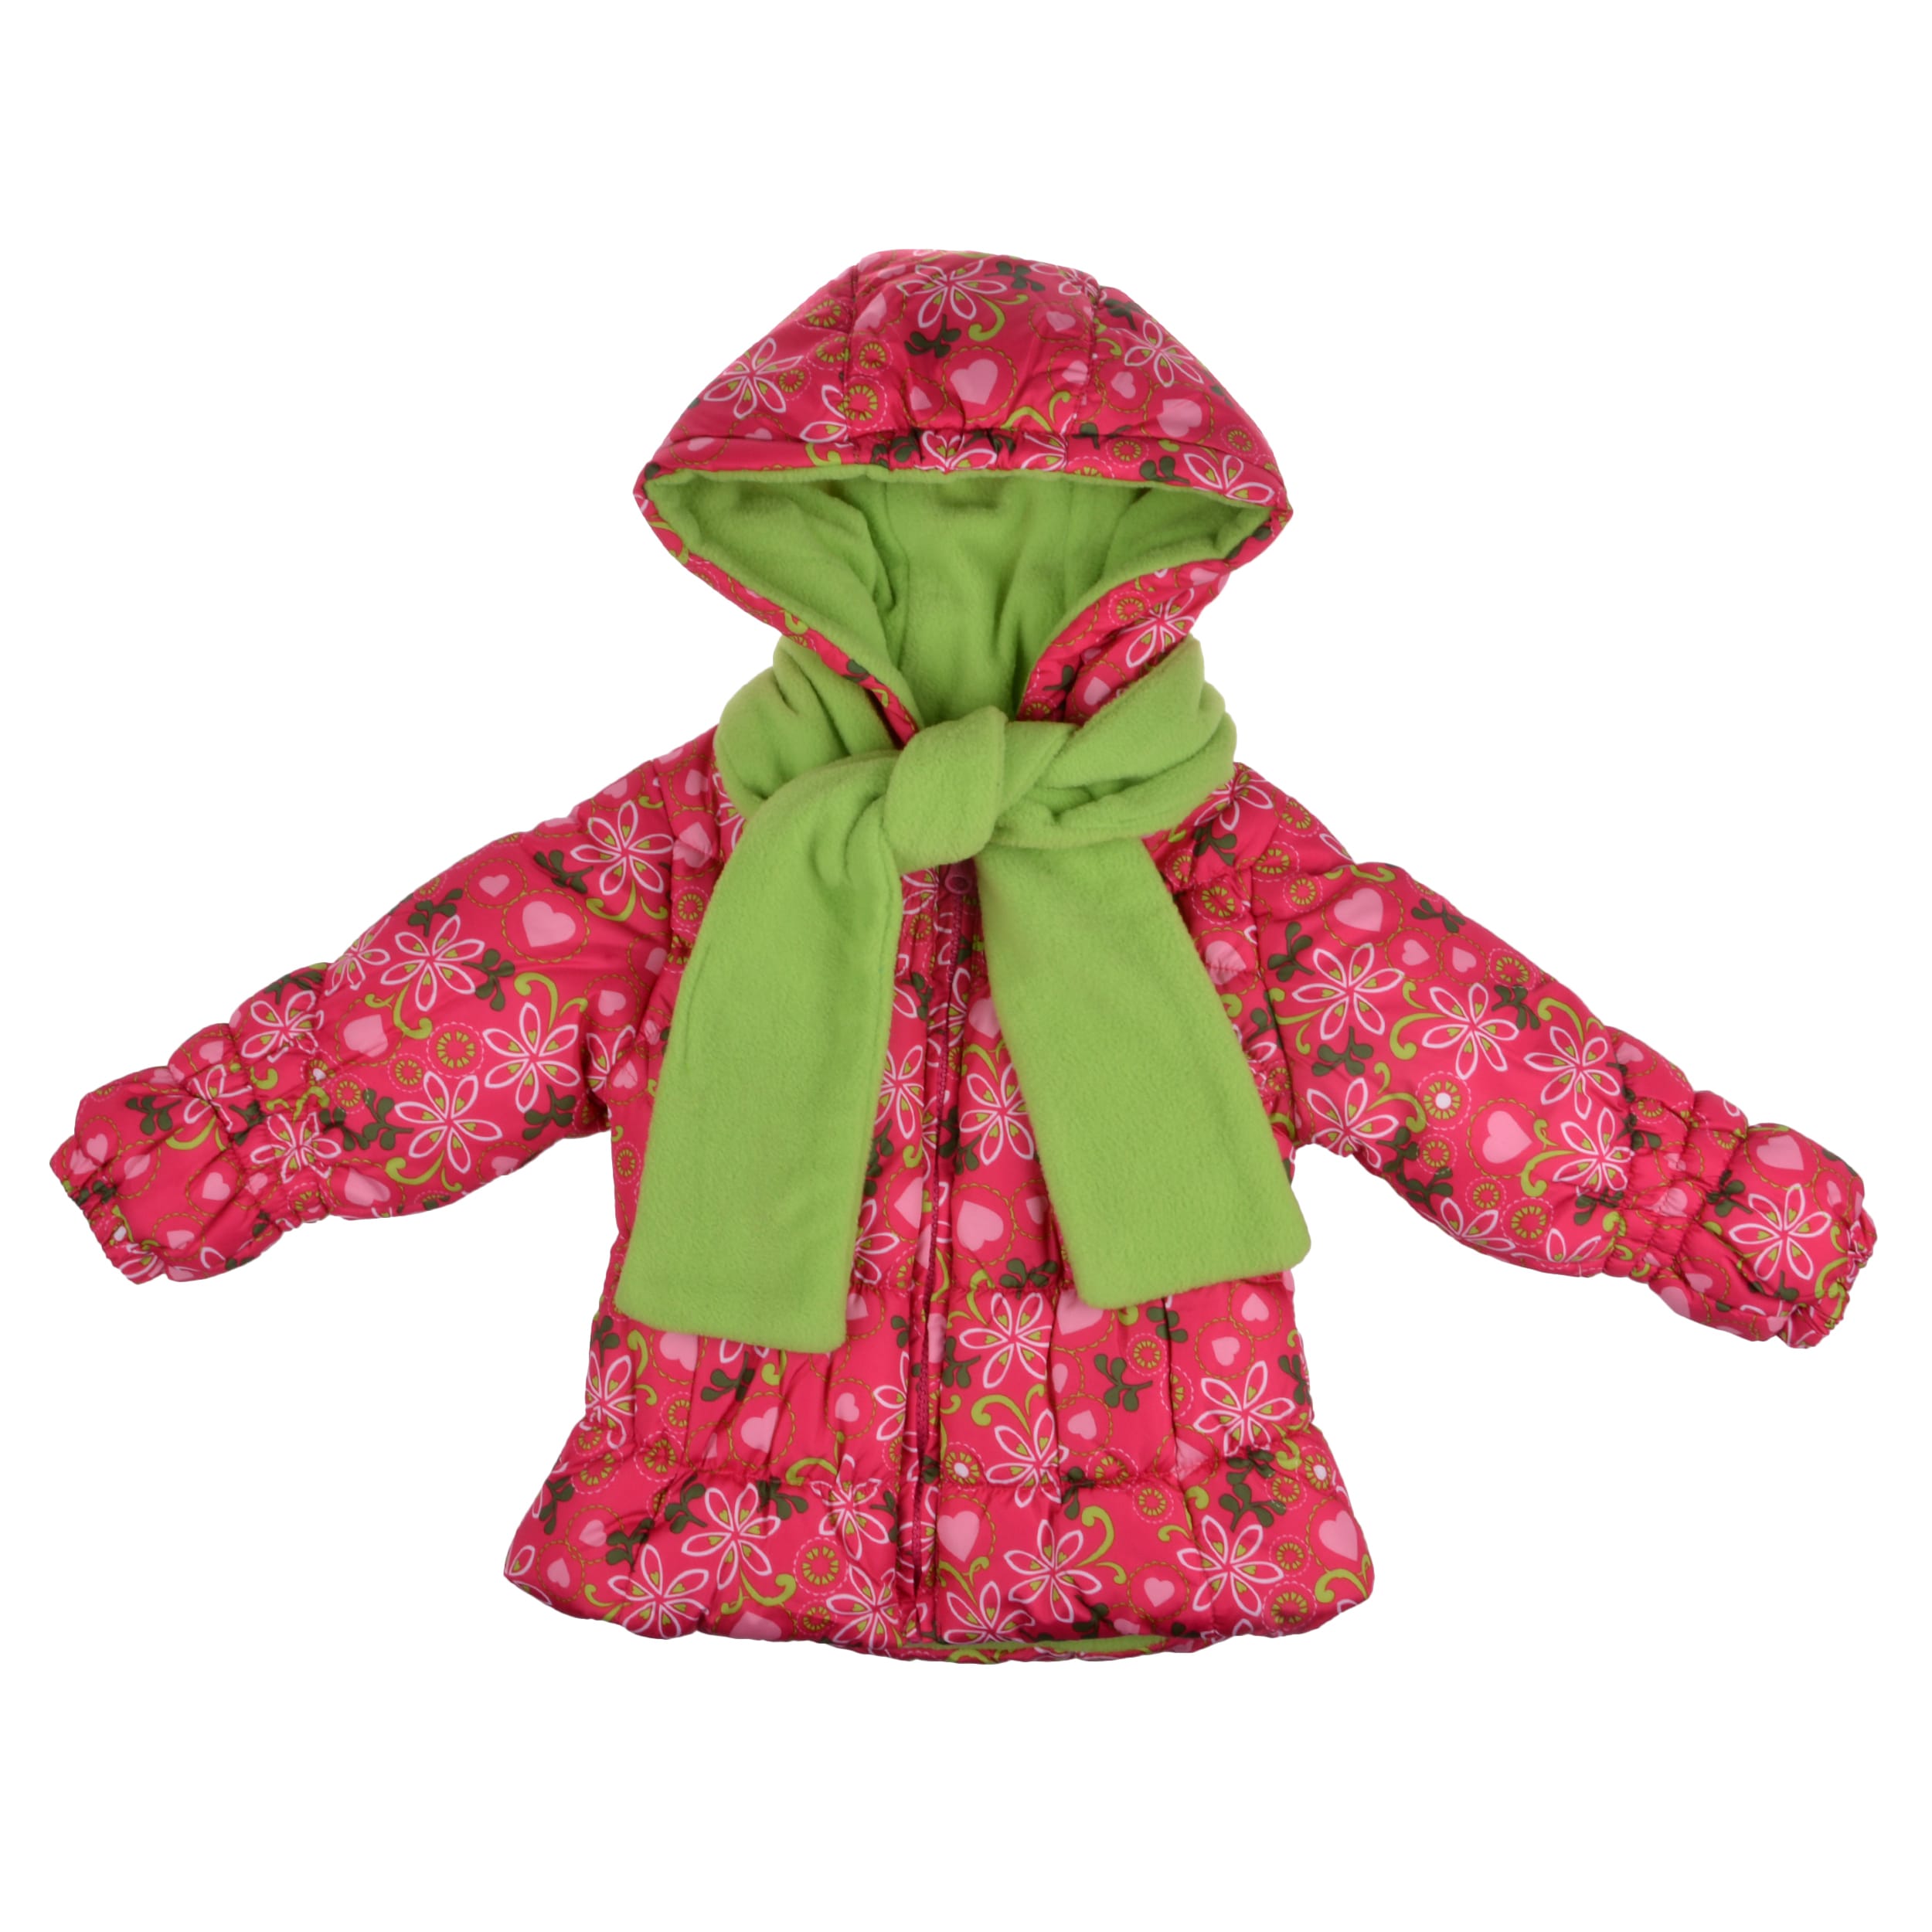 London Fog Girls Fleece Lined Floral Print Bubble Jacket With Two Pockets